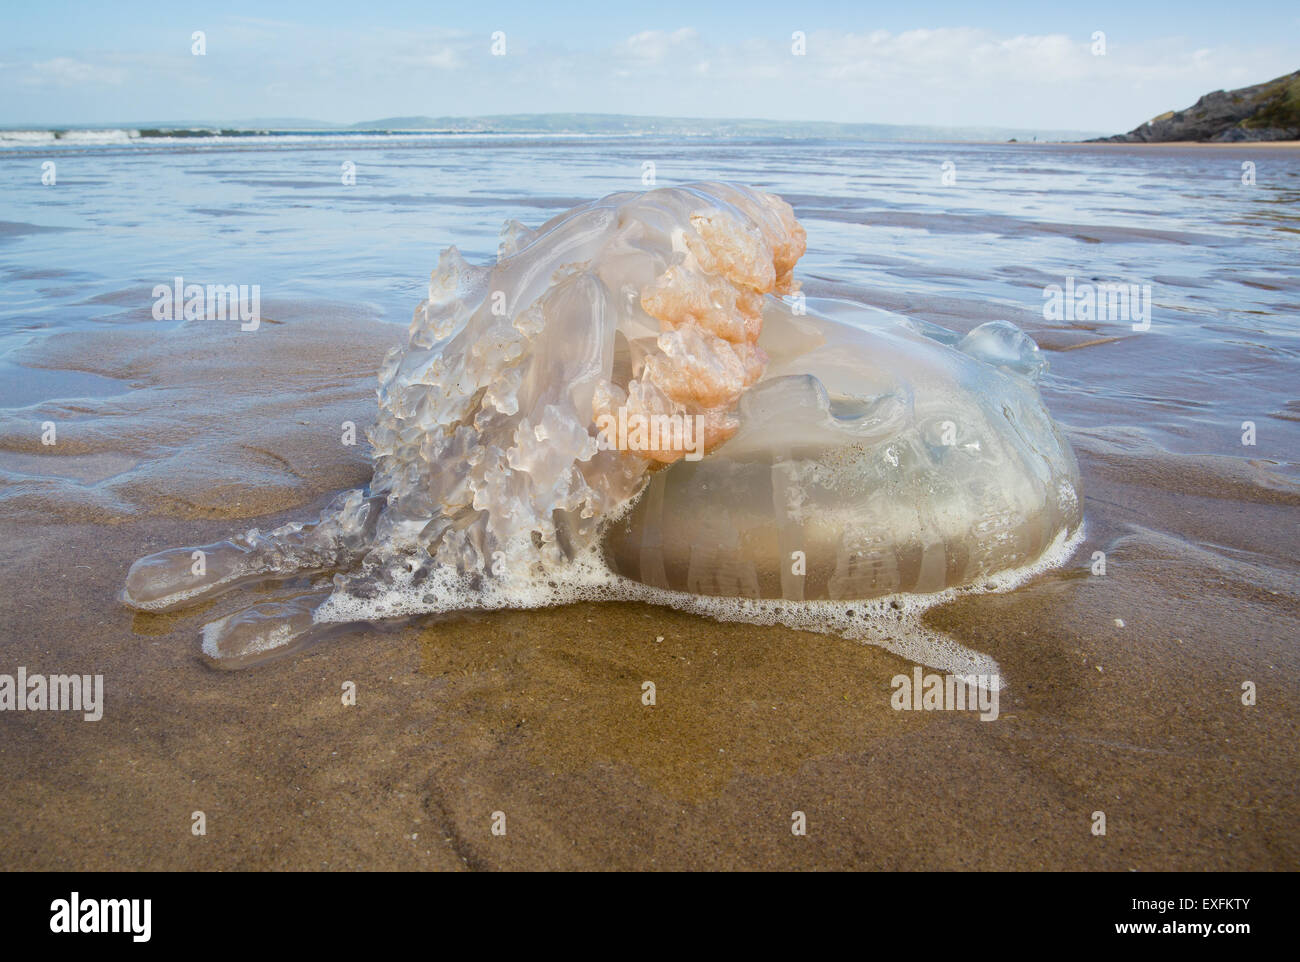 Barrel jellyfish washed up on Whiteford beach on the Gower peninsula in South Wales UK Stock Photo